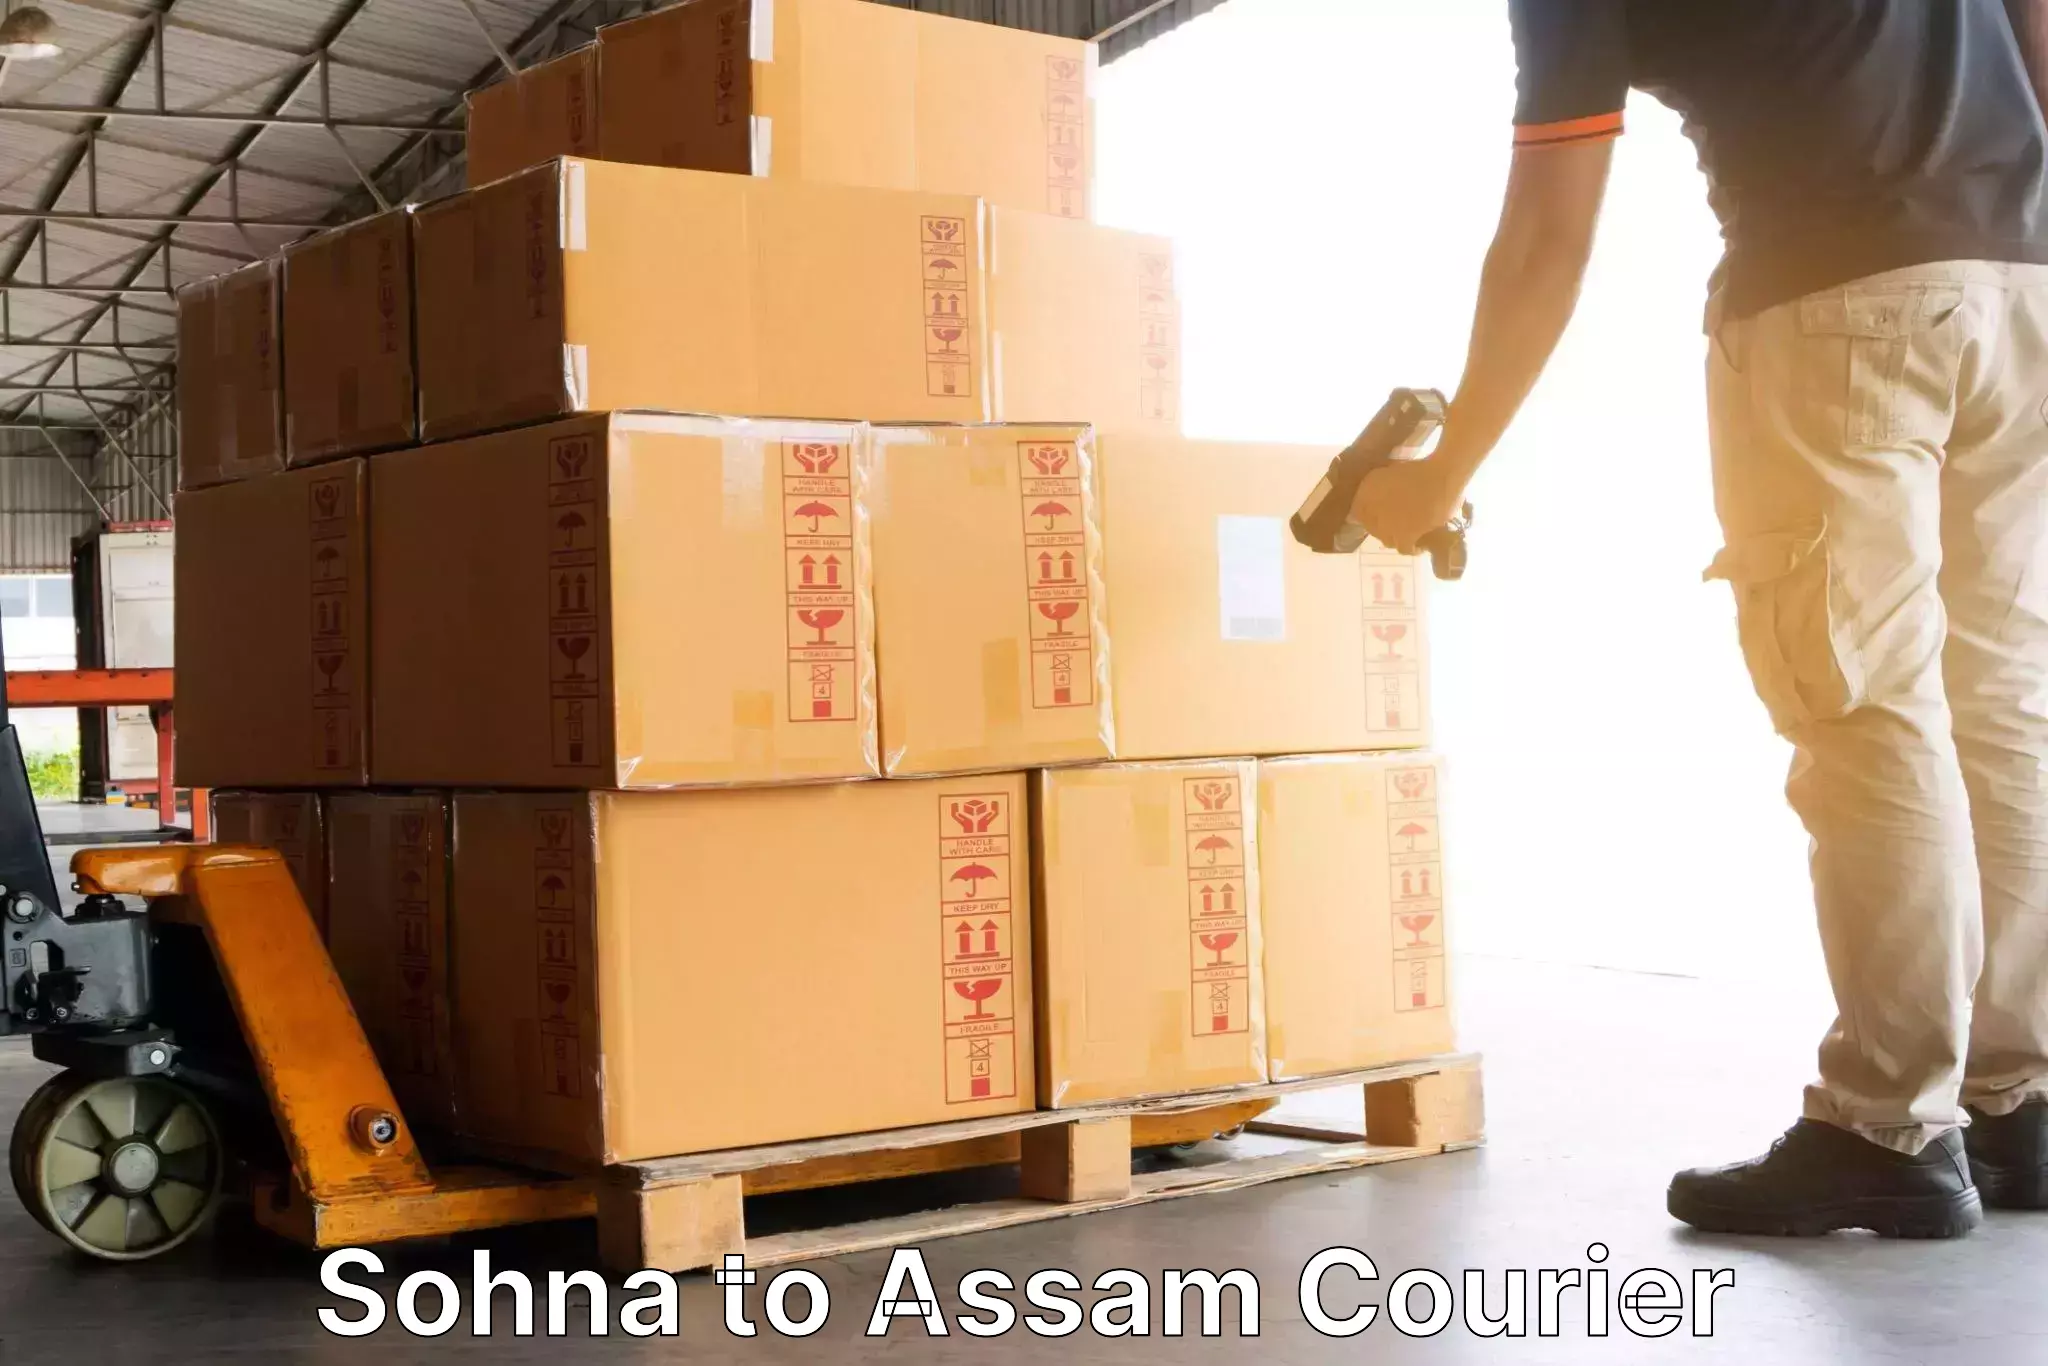 Courier rate comparison in Sohna to Dhubri